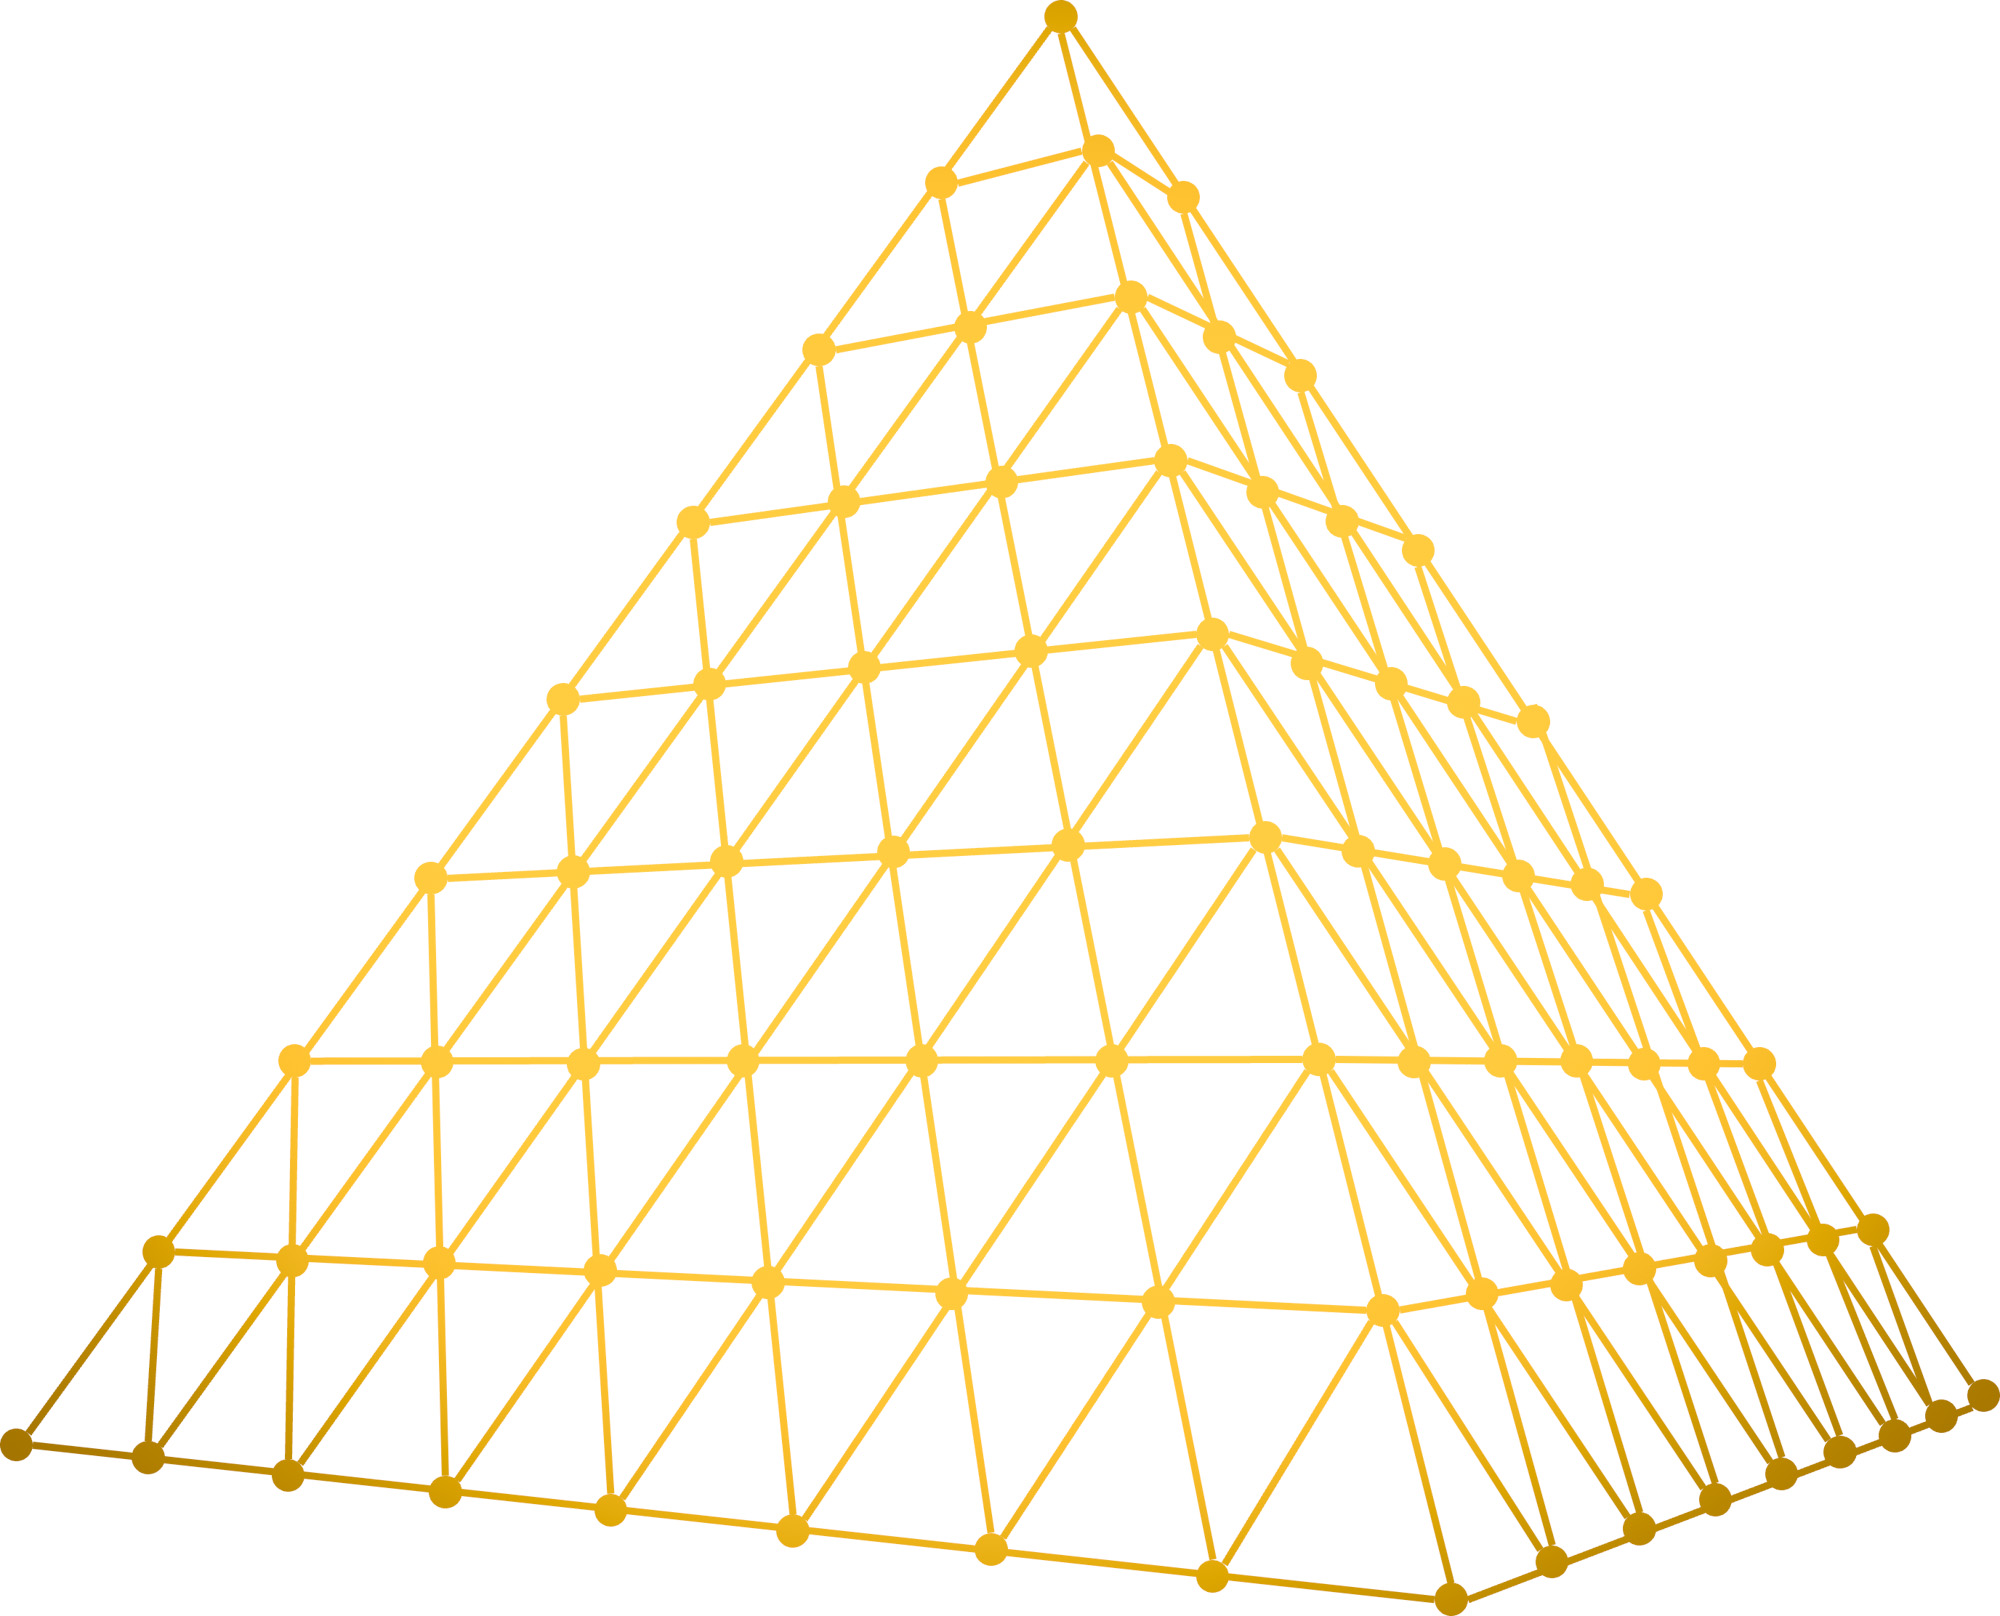 Grid-like pyramid with luminous effects